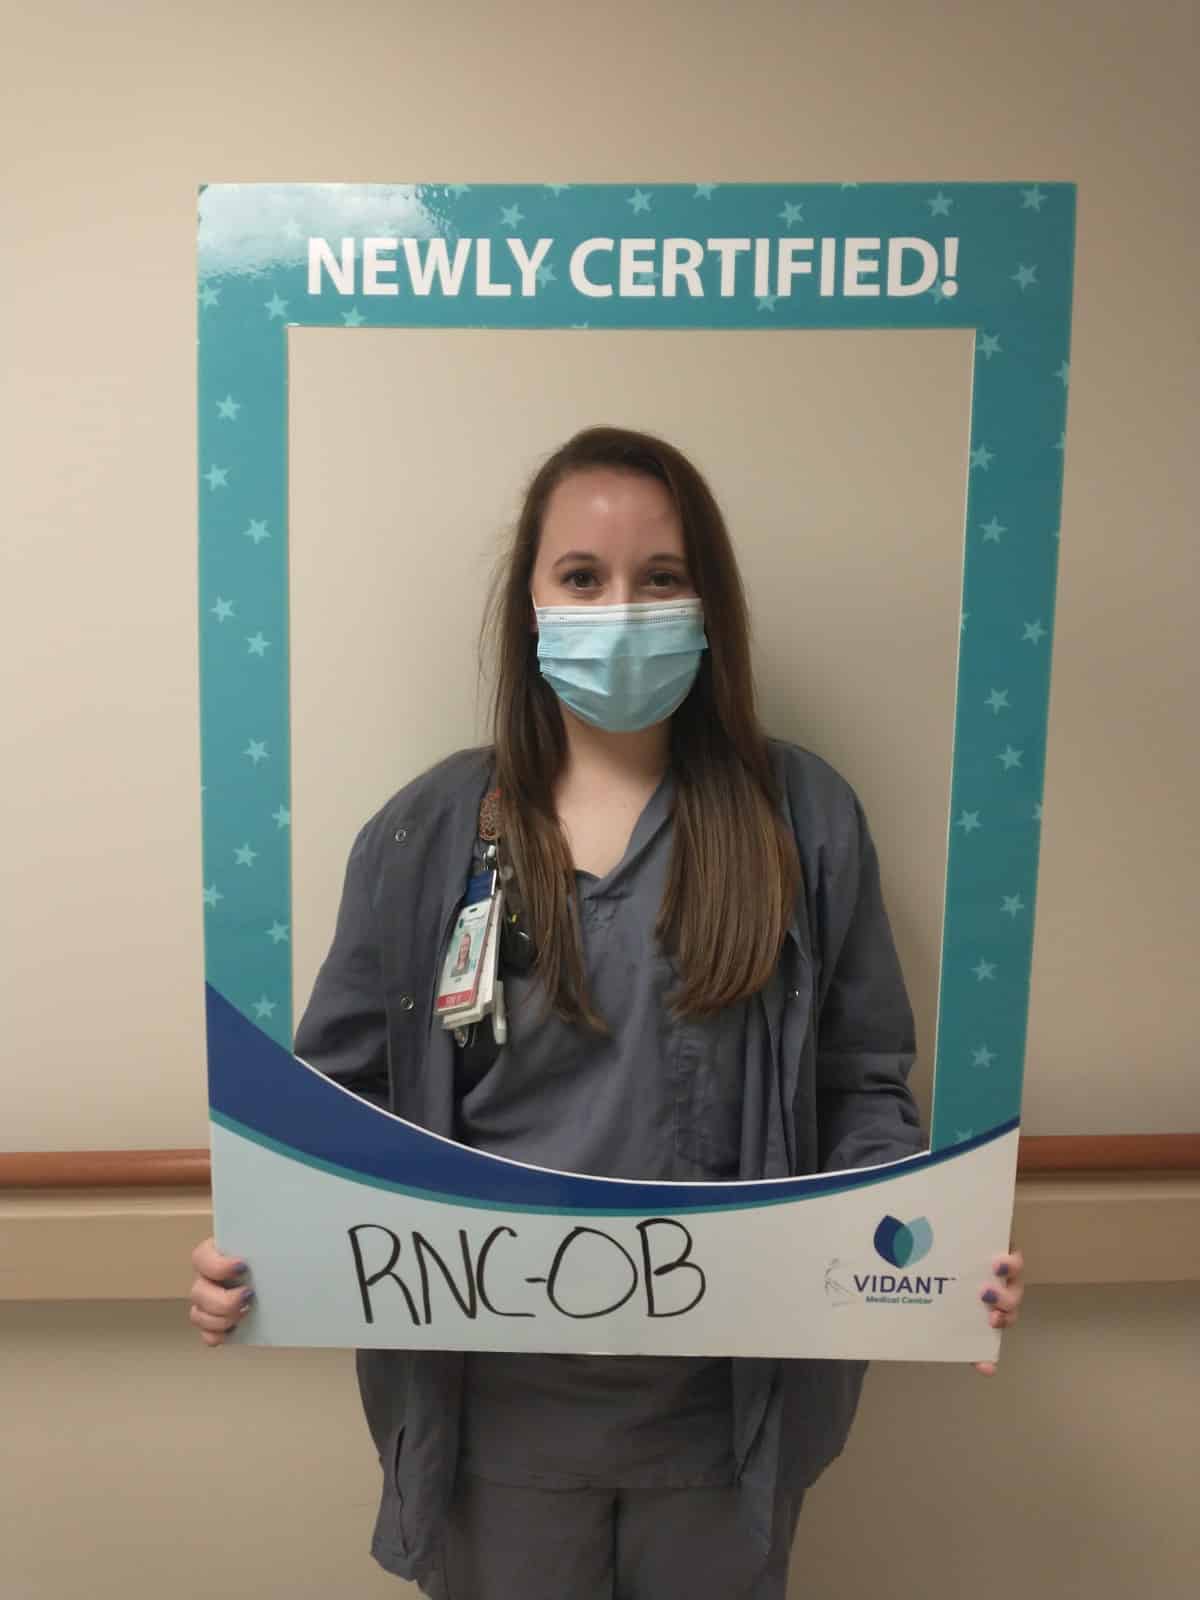 Julie Williams, BSN, RN, RNC-OB, works on Labor and Delivery and received her registered nurse certification in inpatient obstetric nursing